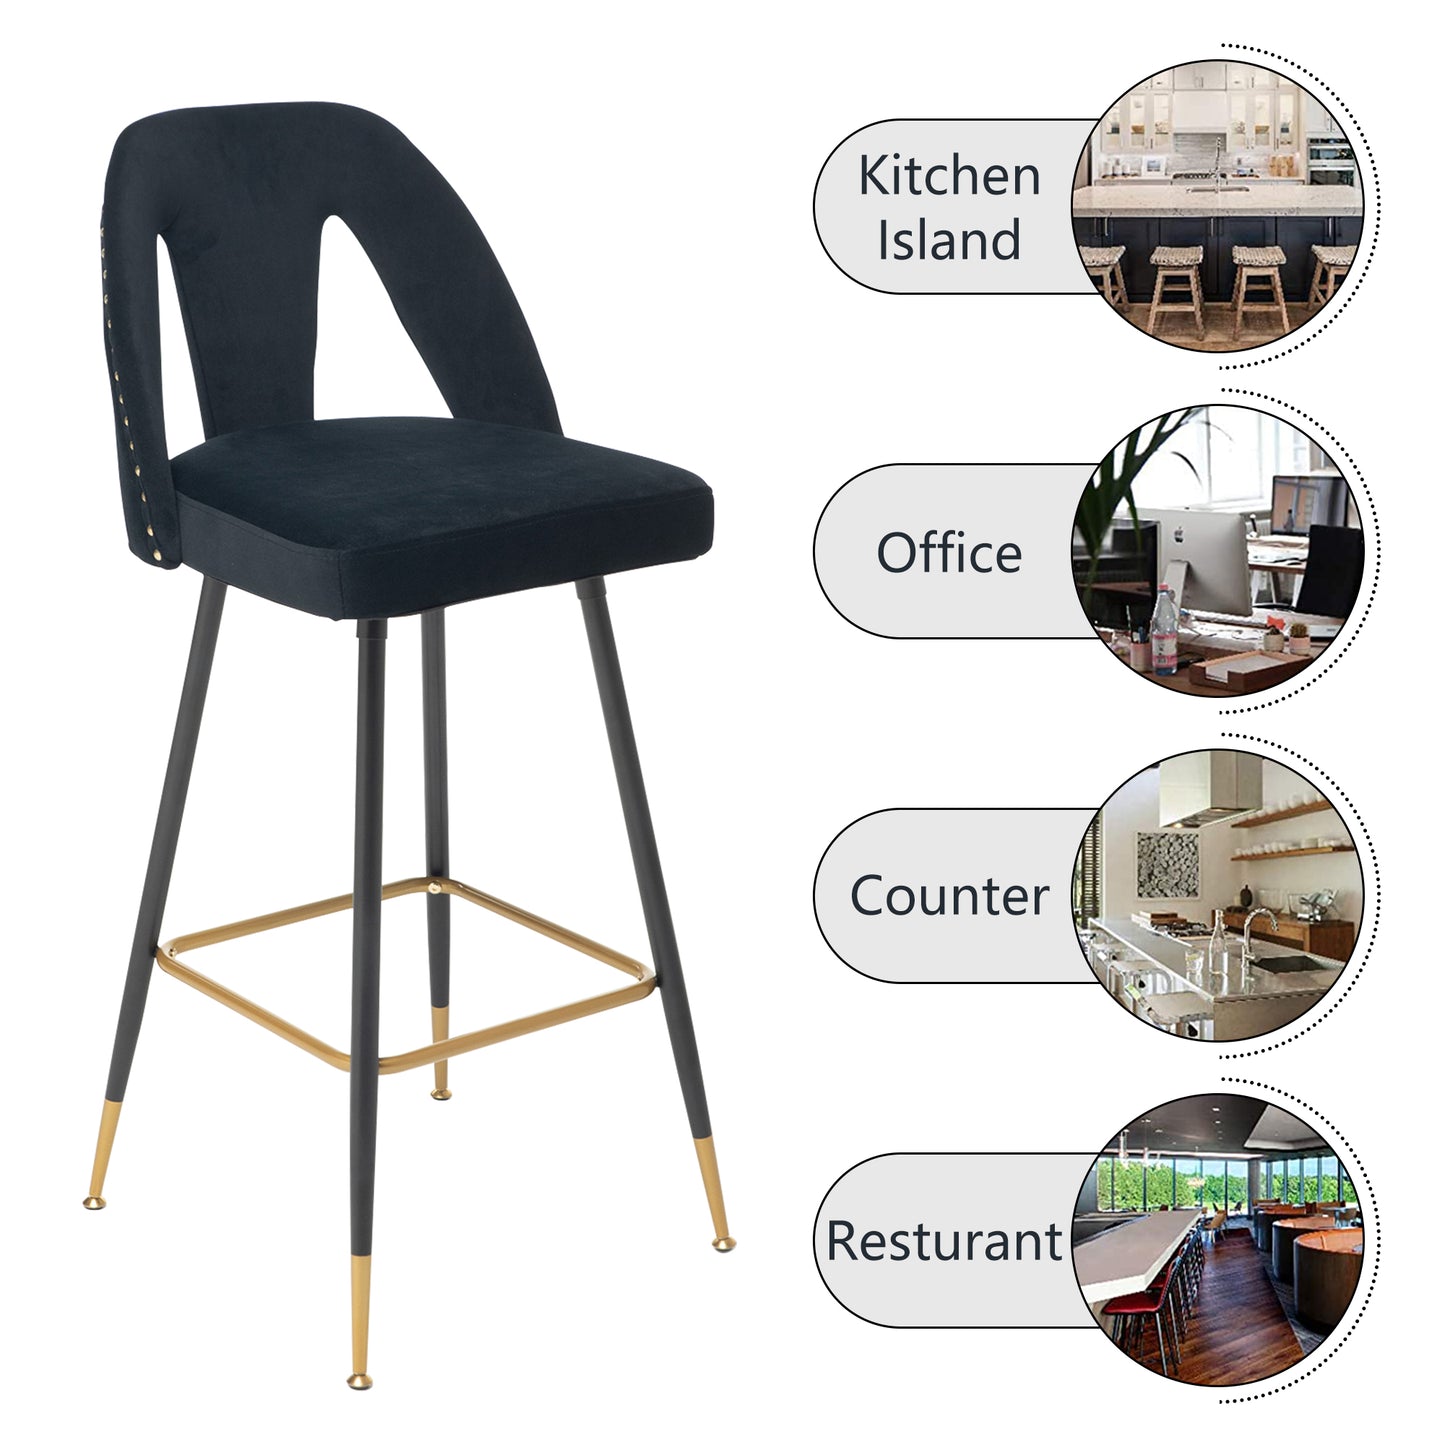 SYNGAR Modern Bar Chairs Set of 2, Contemporary Velvet Upholstered Bar Stools Tool and Counter Stools with Nailheads and Gold Tipped Black Metal Legs, Black Leisure Style Bar Chairs, Black